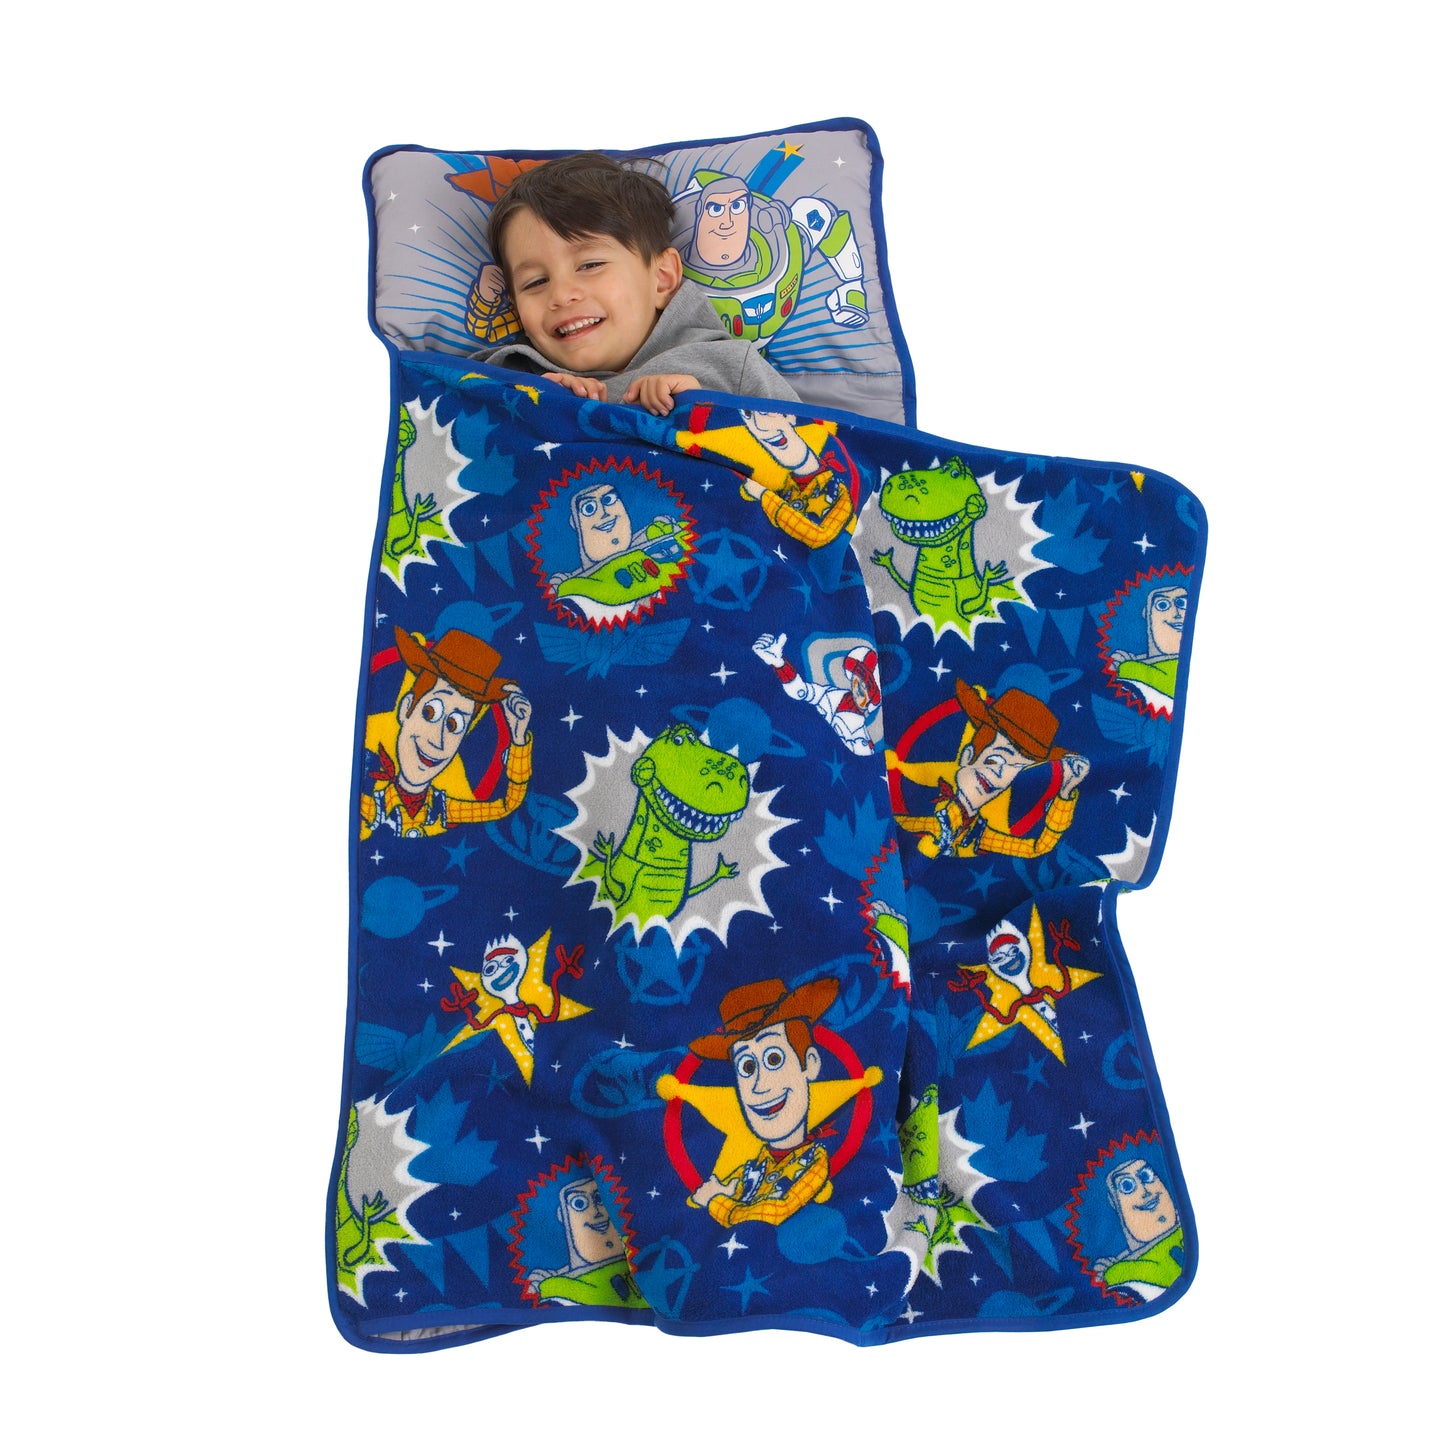 Disney Toy Story 4  - Blue, Green, Yellow, Grey Toys in Action Toddler Nap Mat